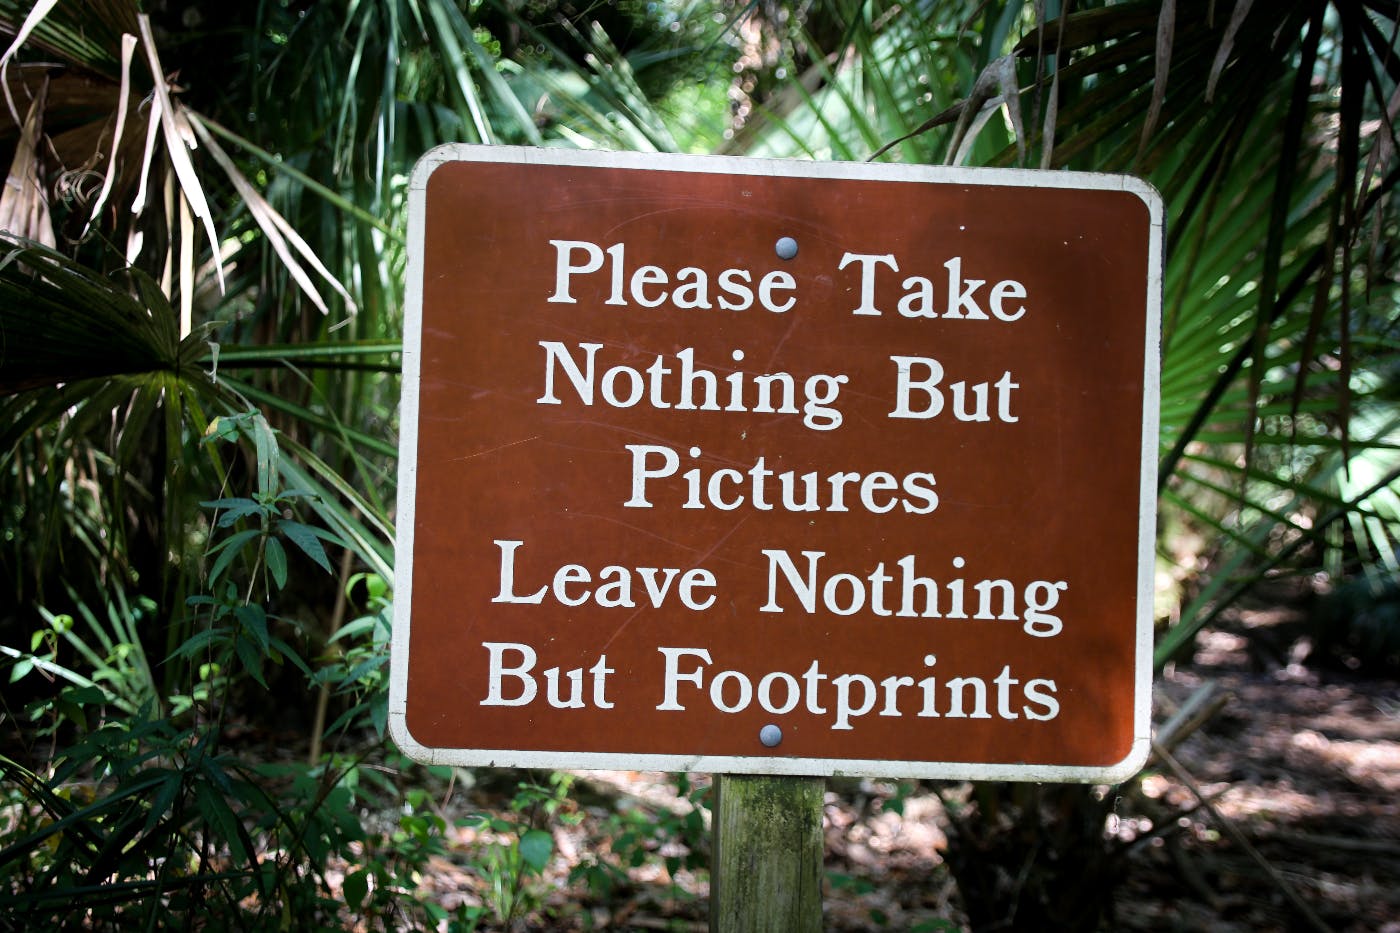 A national Park Sign reading "Please Take Nothing but Pictures Leave Nothing But Footprints."